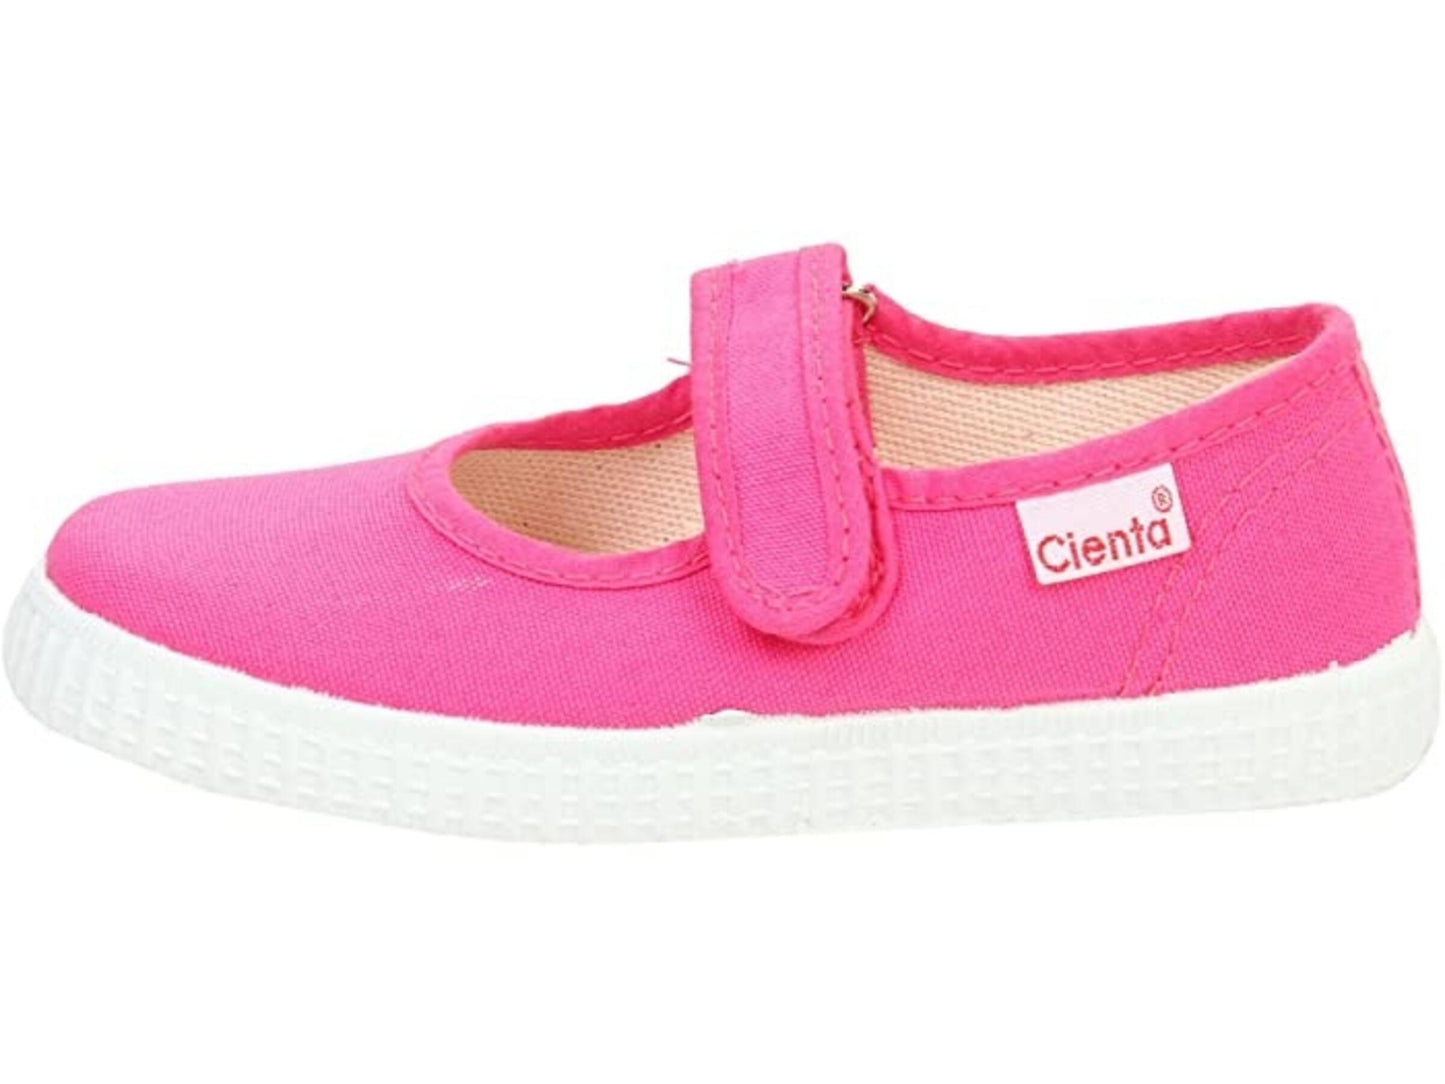 Girls Canvas Velcro Strap Shoes - Pink or Blue